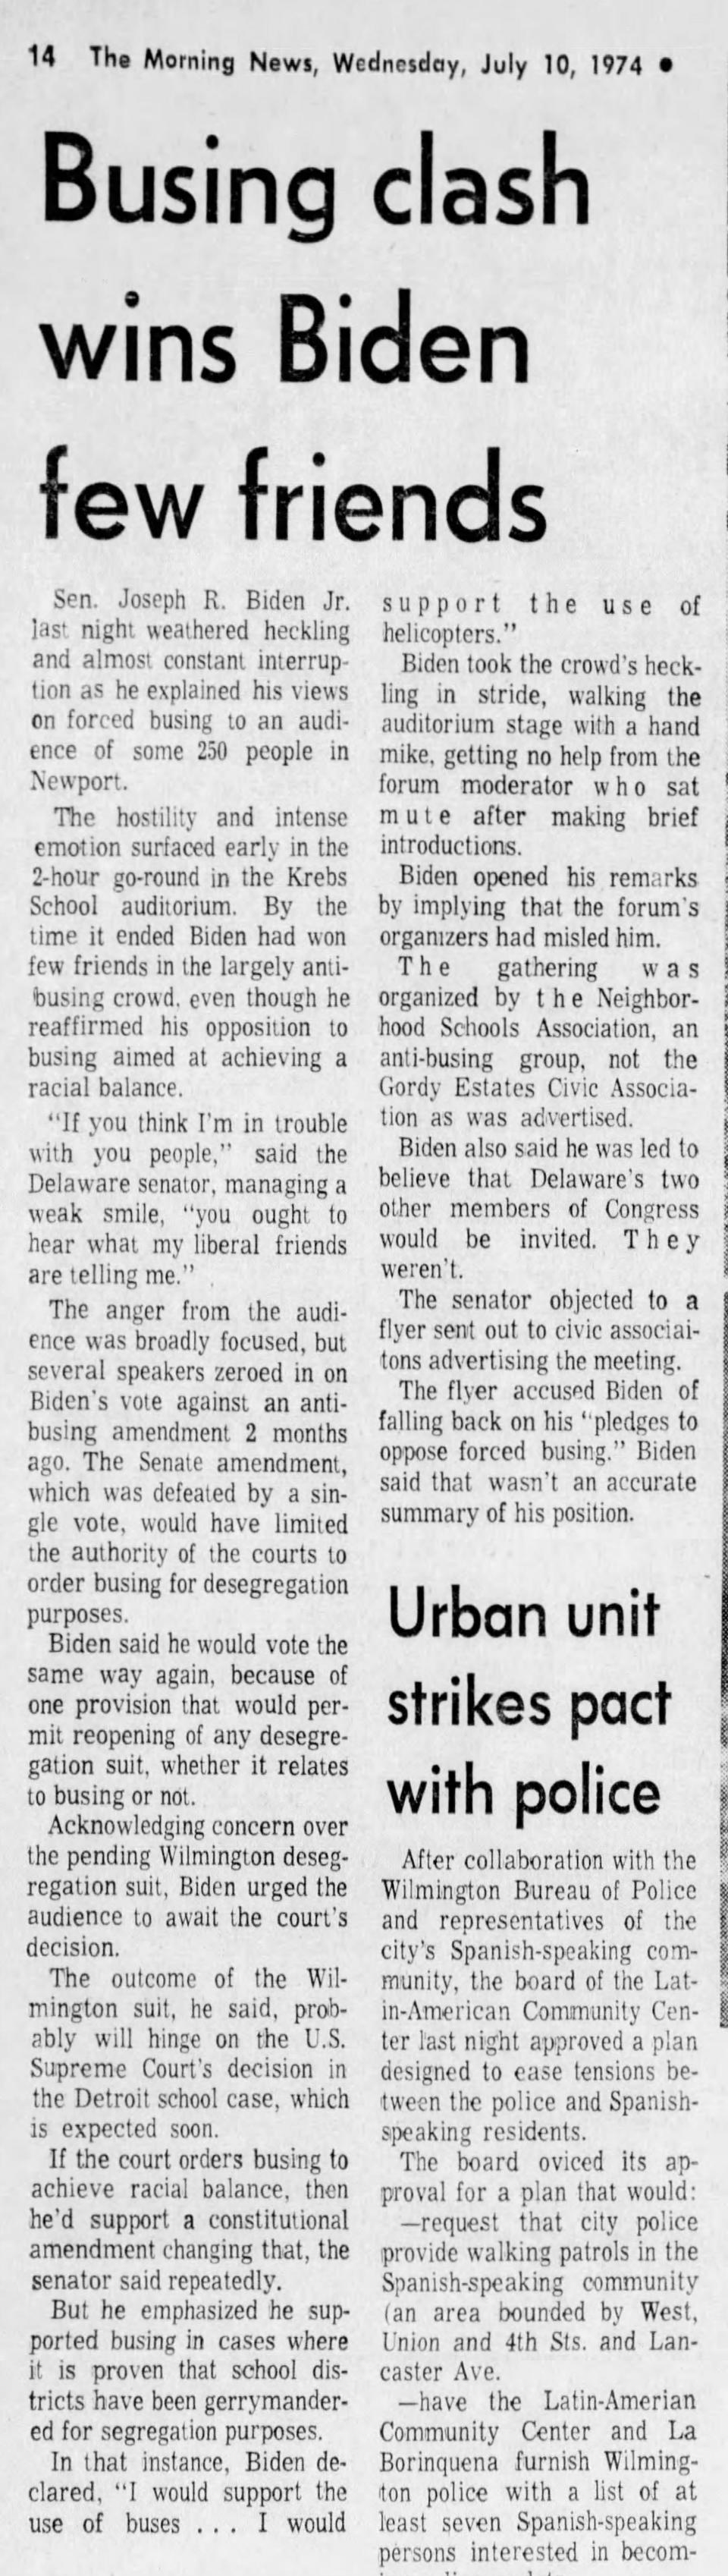 News Journal archival story on July 10, 1974 of Biden being heckled by suburban busing opponents in 1974